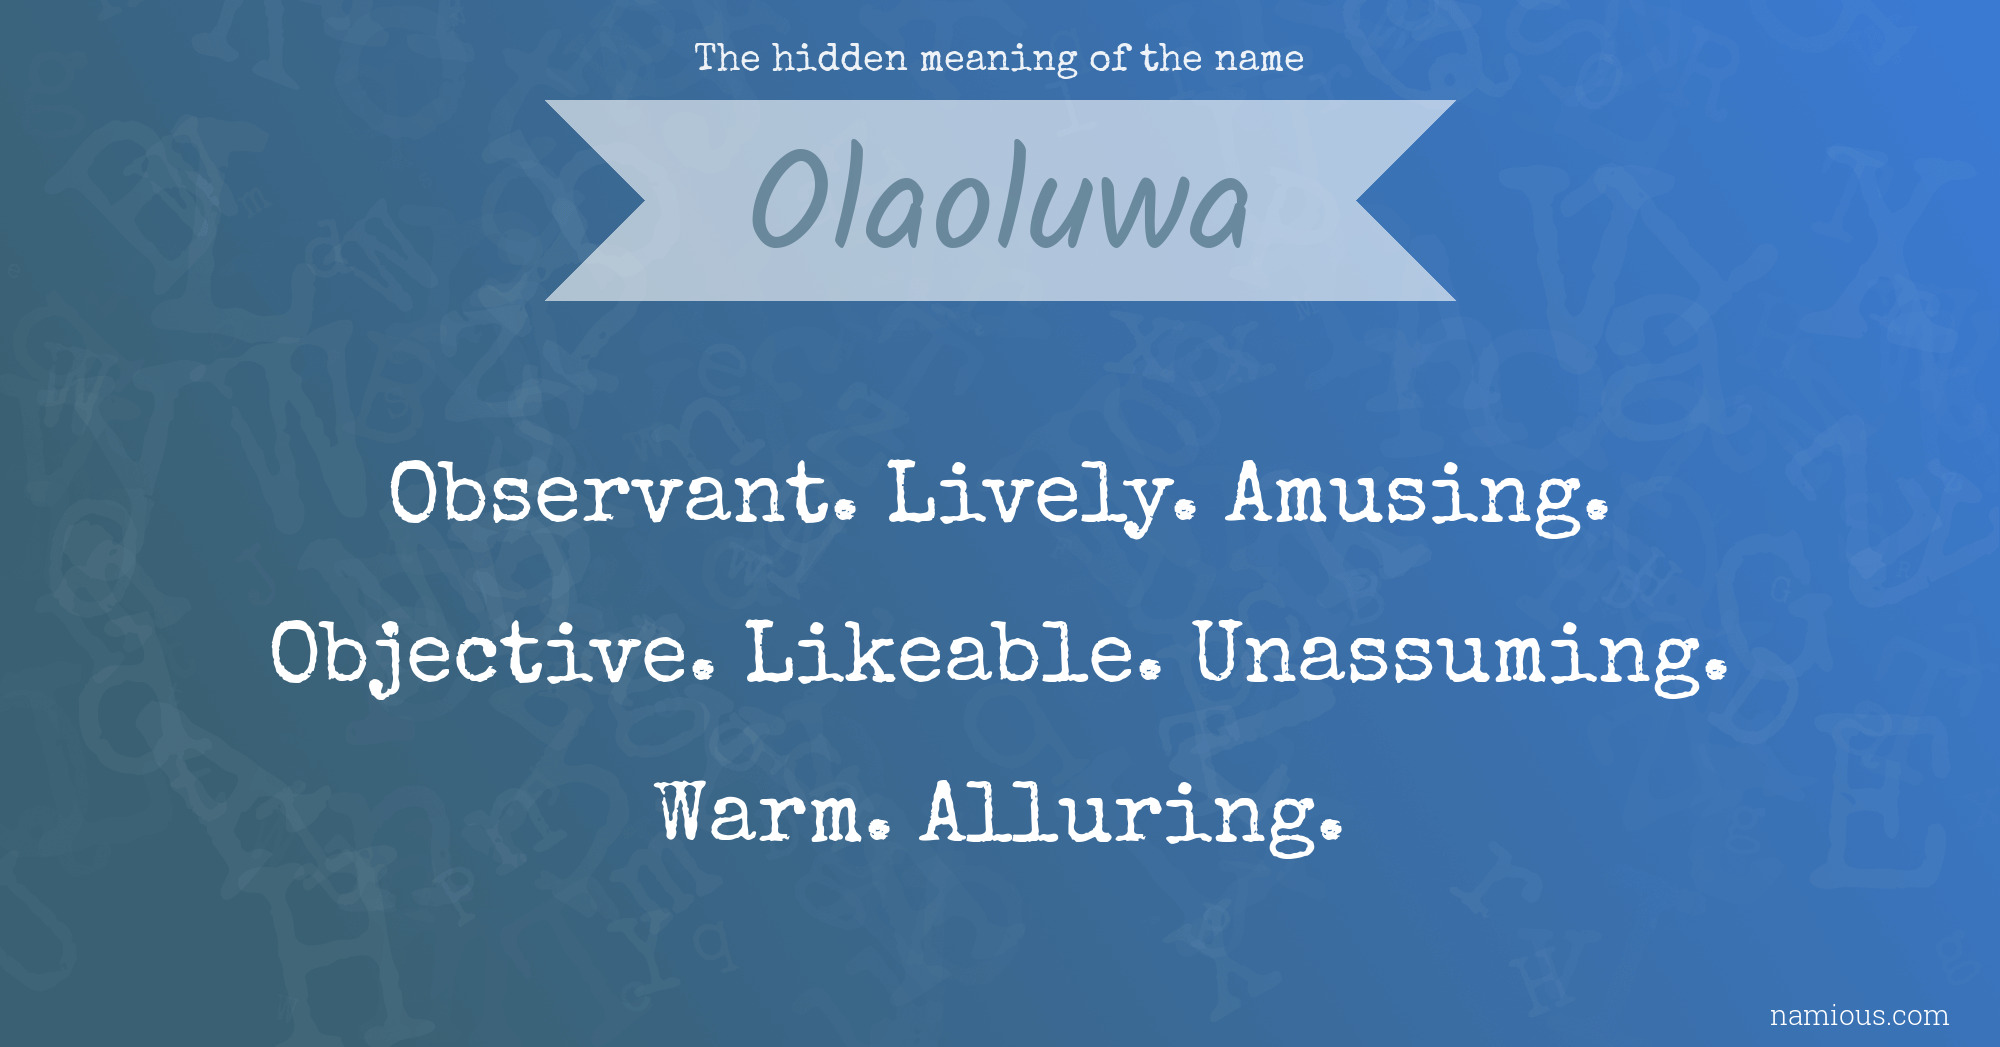 The hidden meaning of the name Olaoluwa